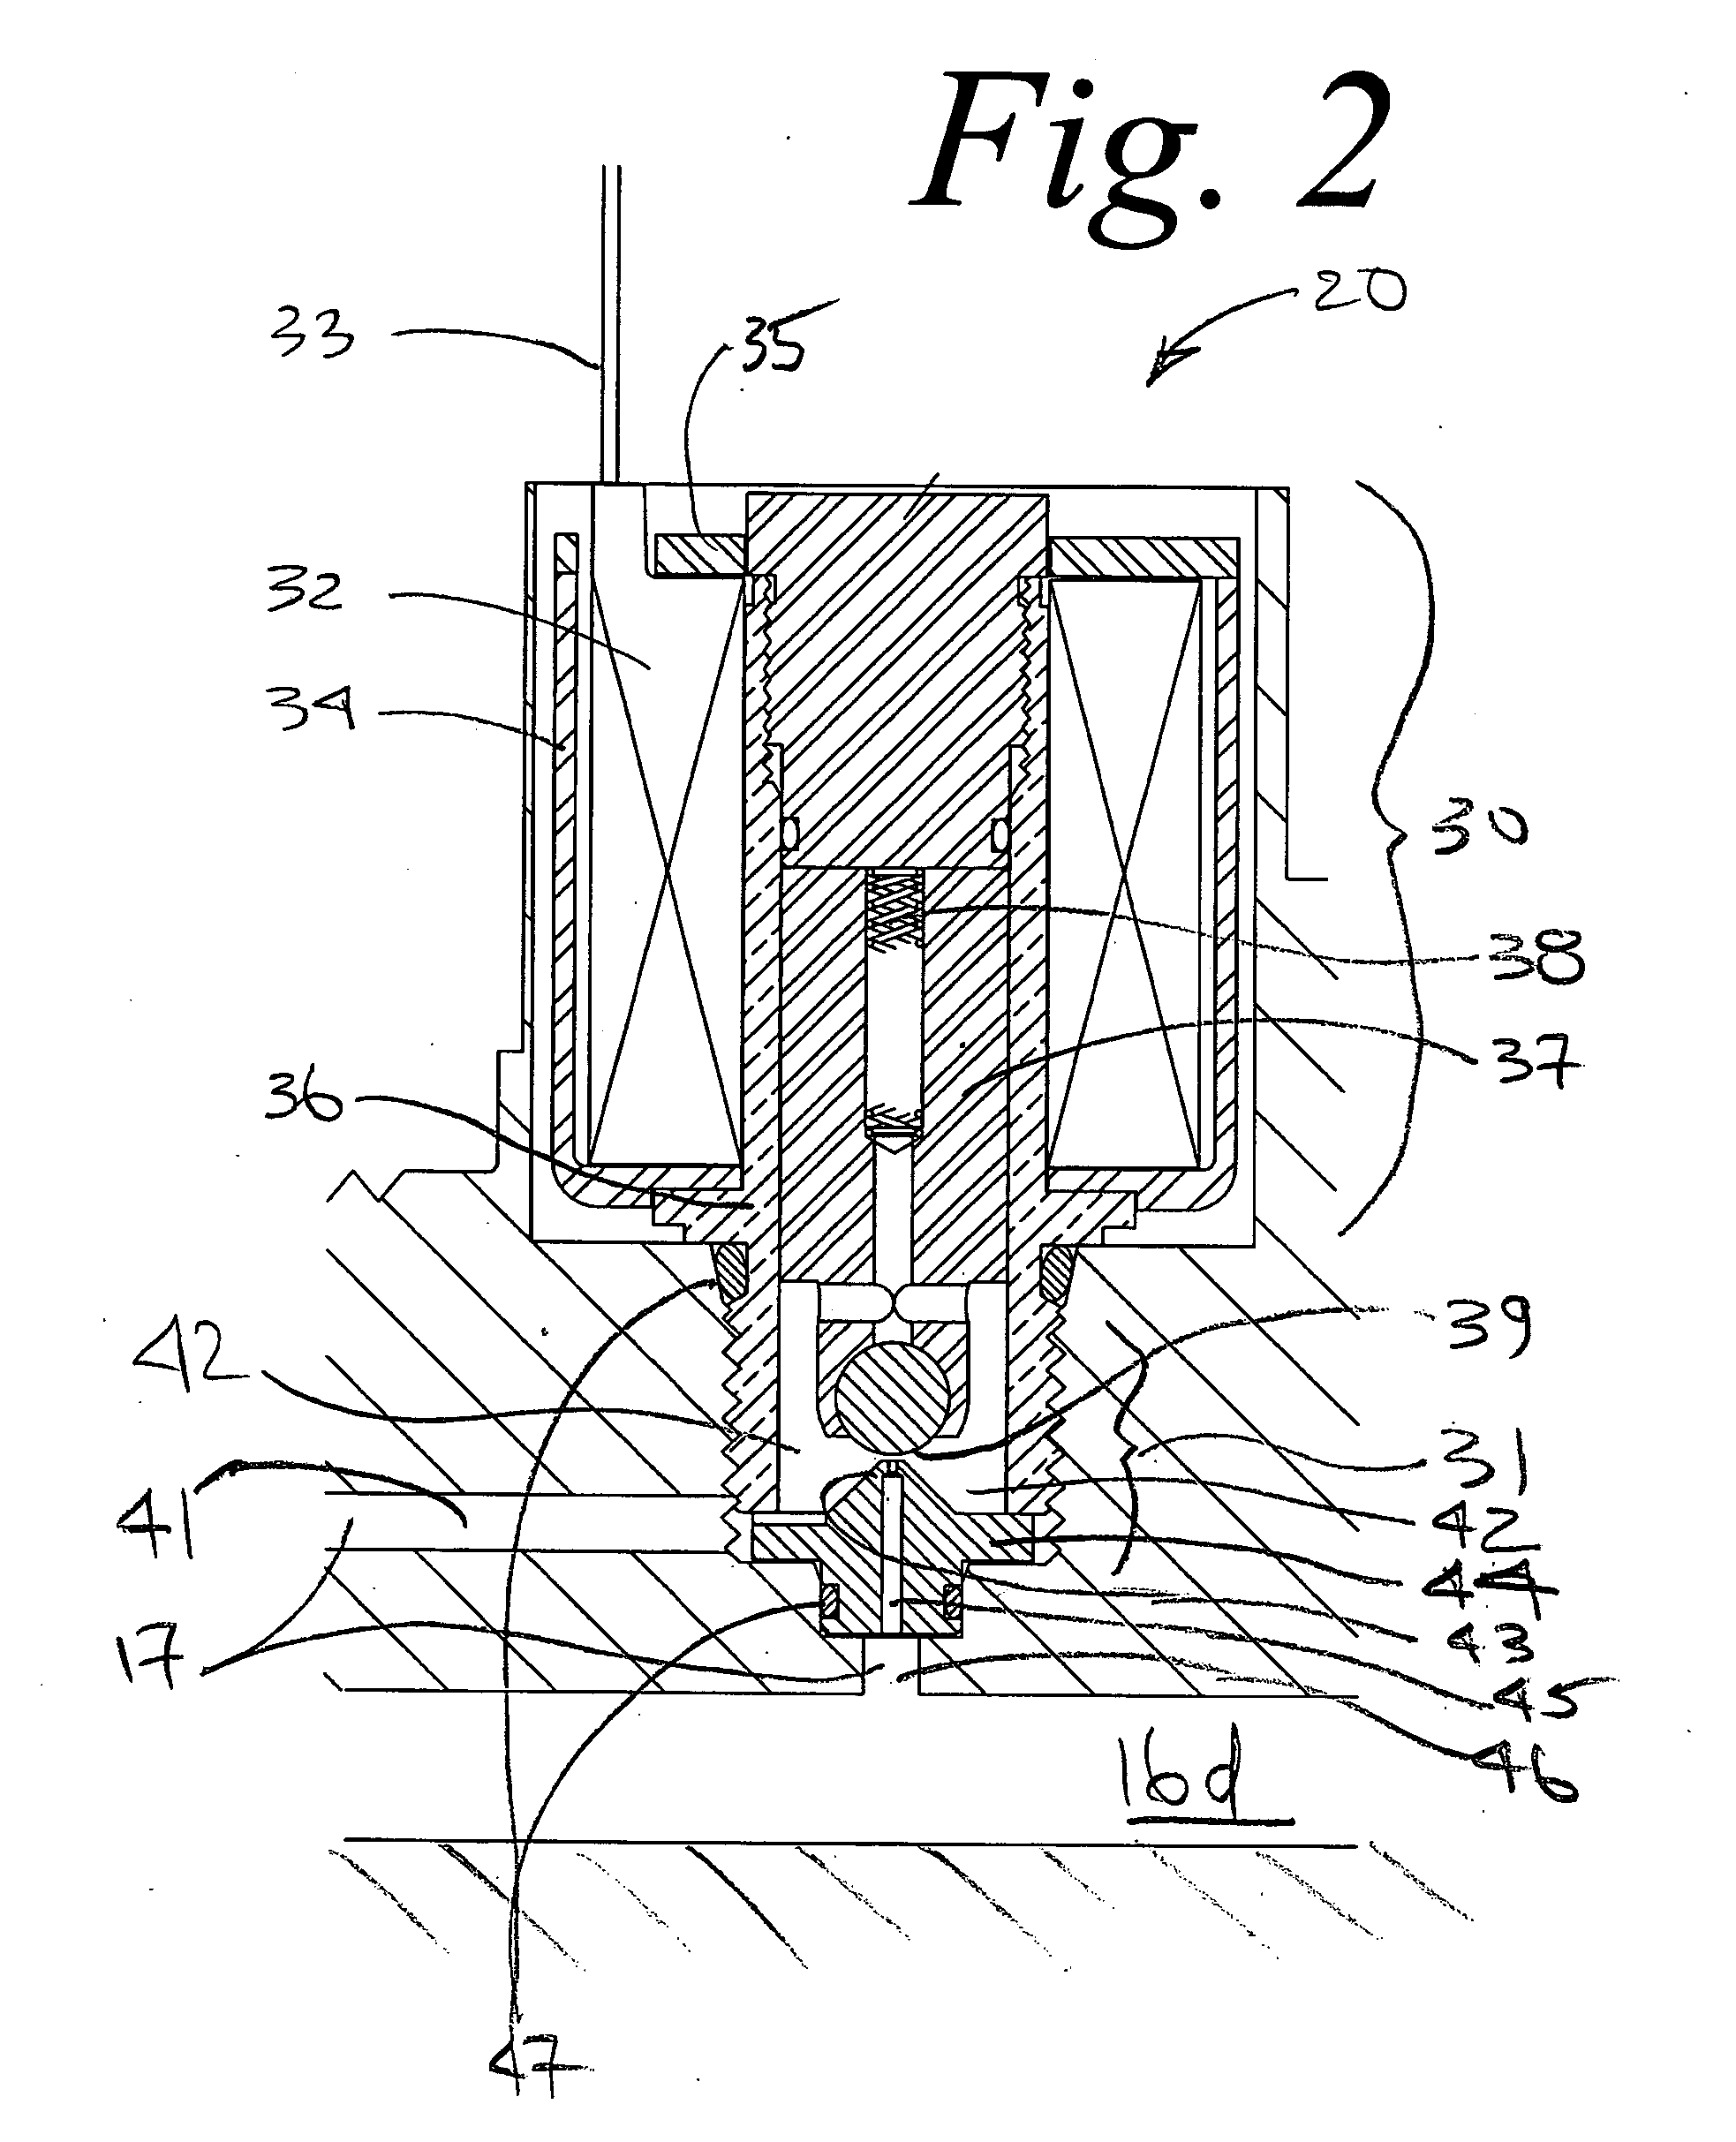 Flow control system for a valve